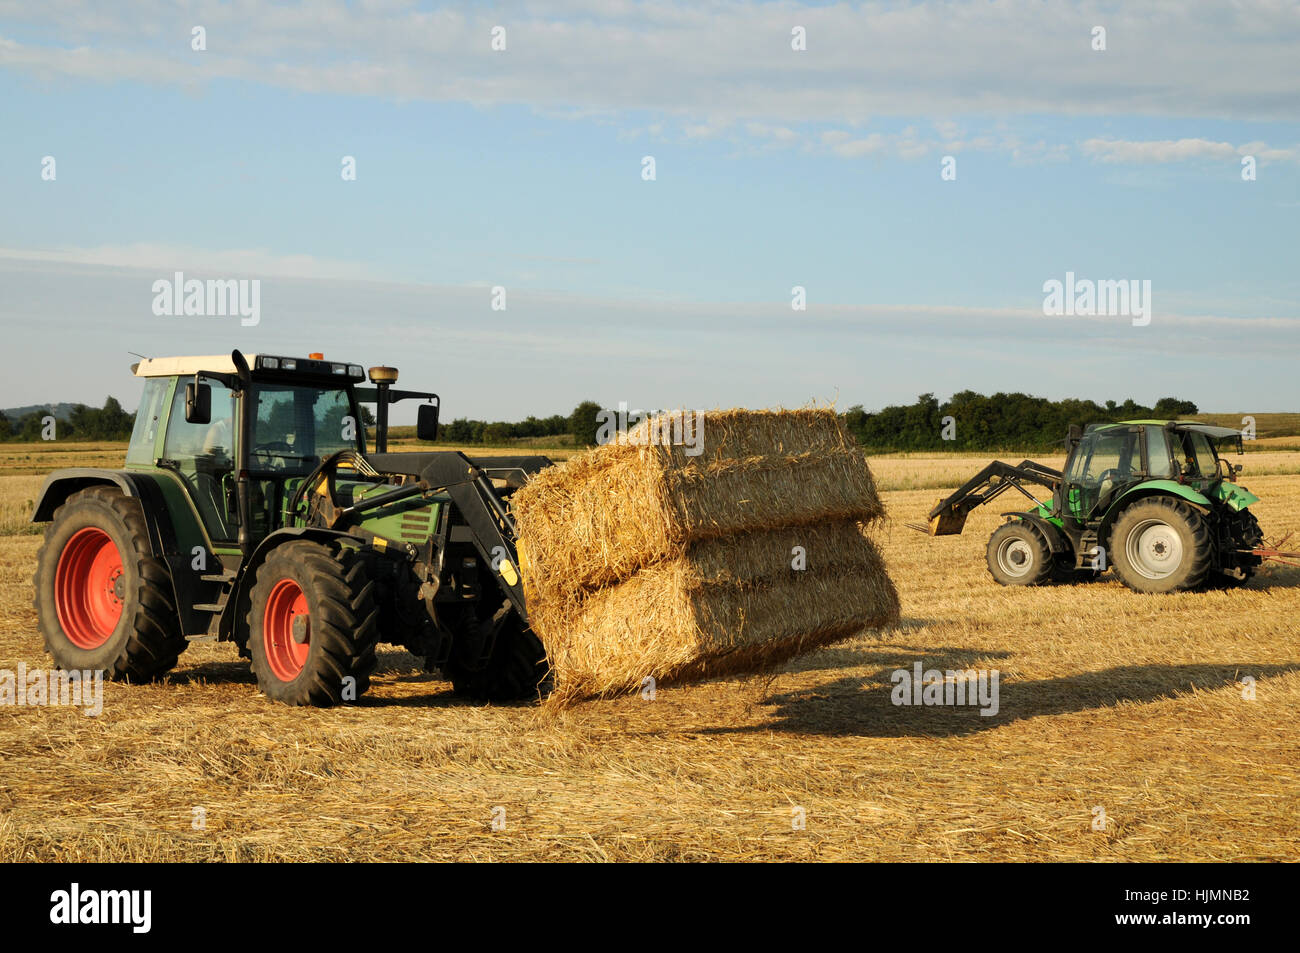 agriculture, farming, straw ball, tractor, tractors, harvest, agriculture, Stock Photo